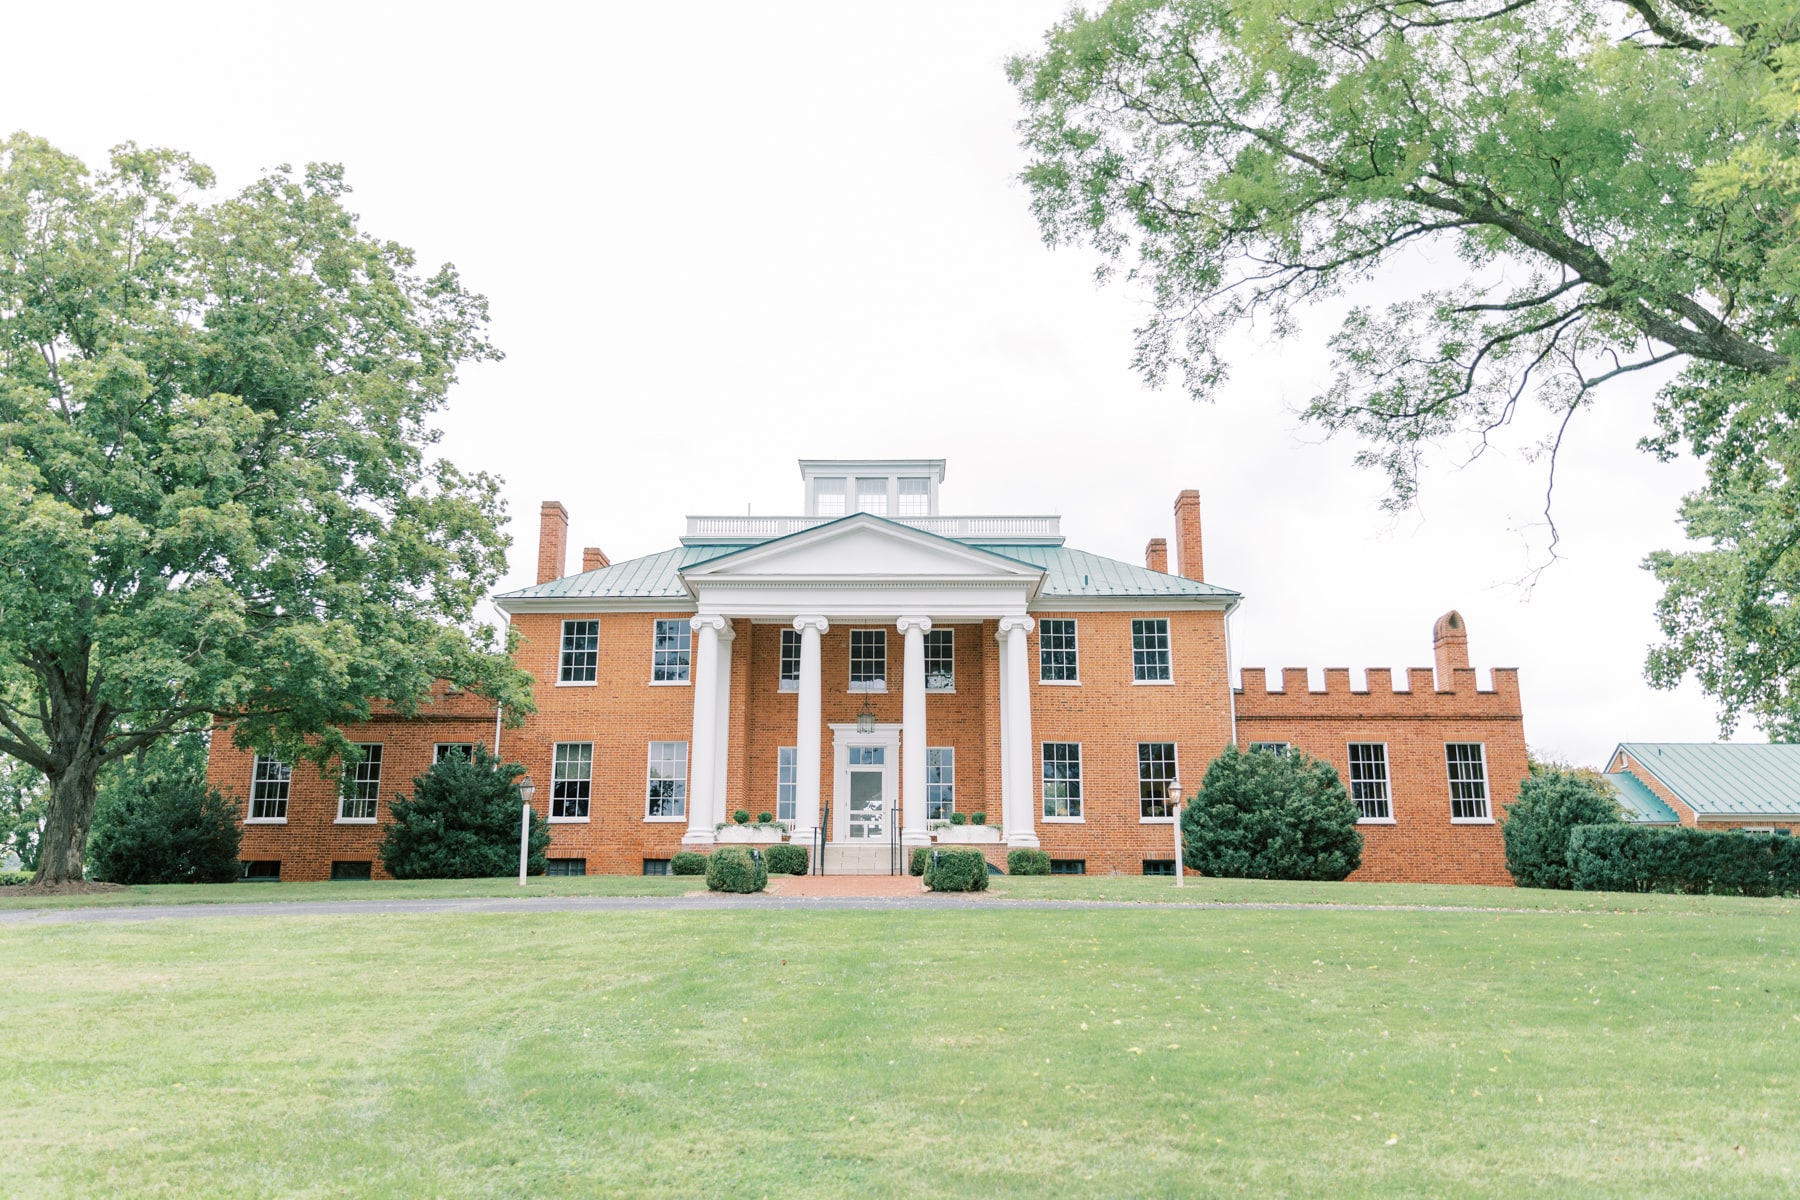 Long branch farm is a stately venue, this is the mansion at the top of the hill, overlooking the horse farm